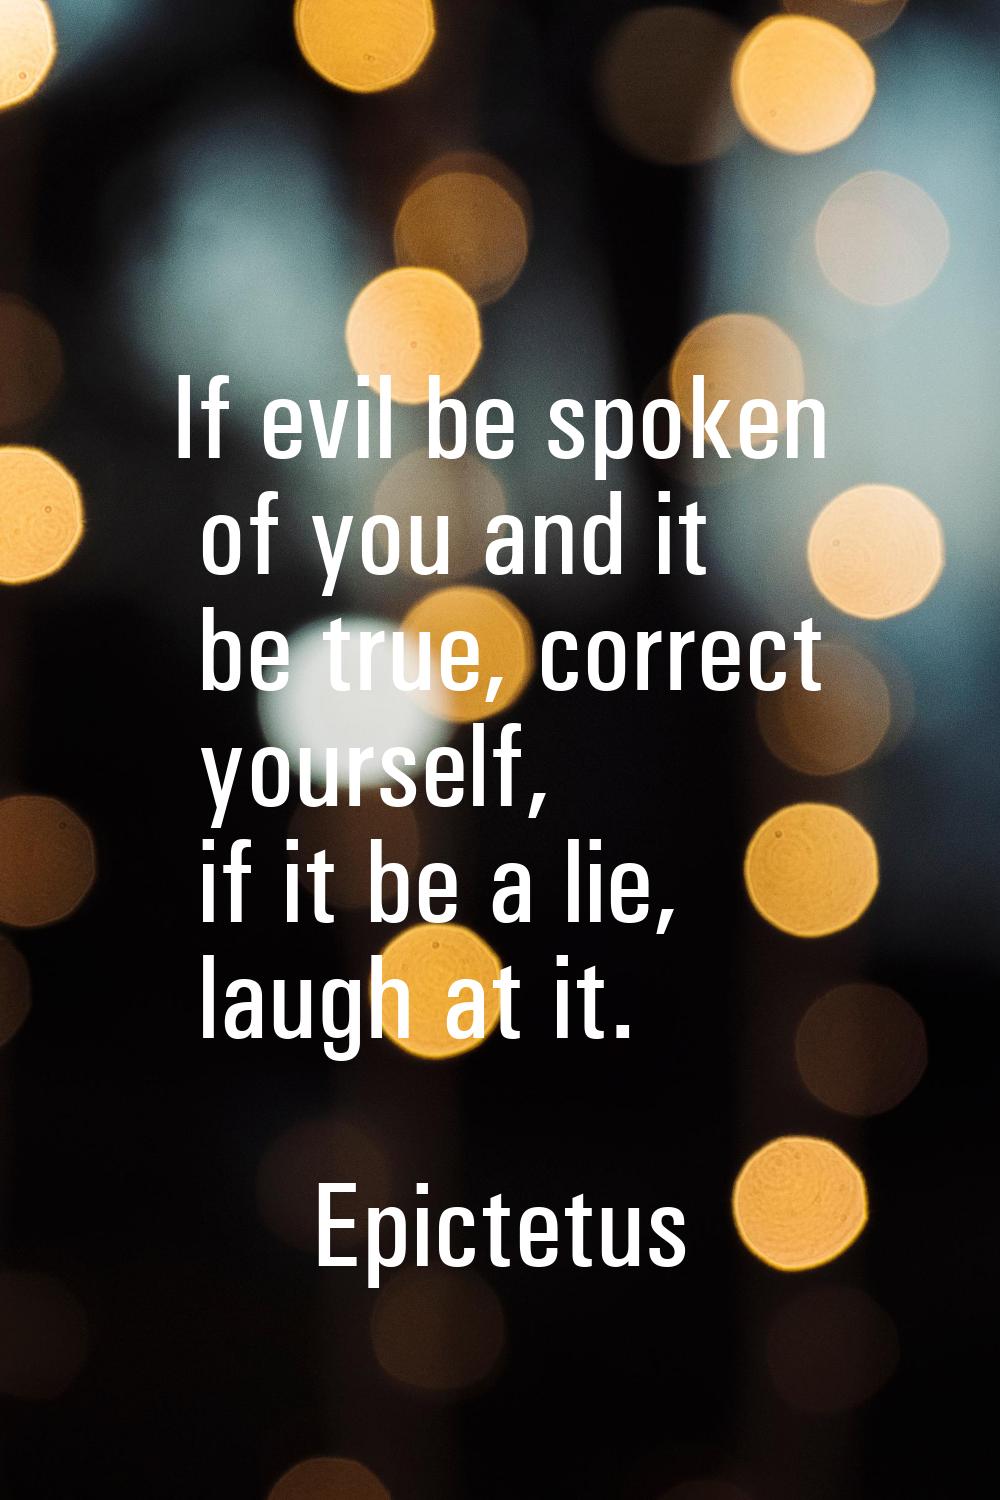 If evil be spoken of you and it be true, correct yourself, if it be a lie, laugh at it.